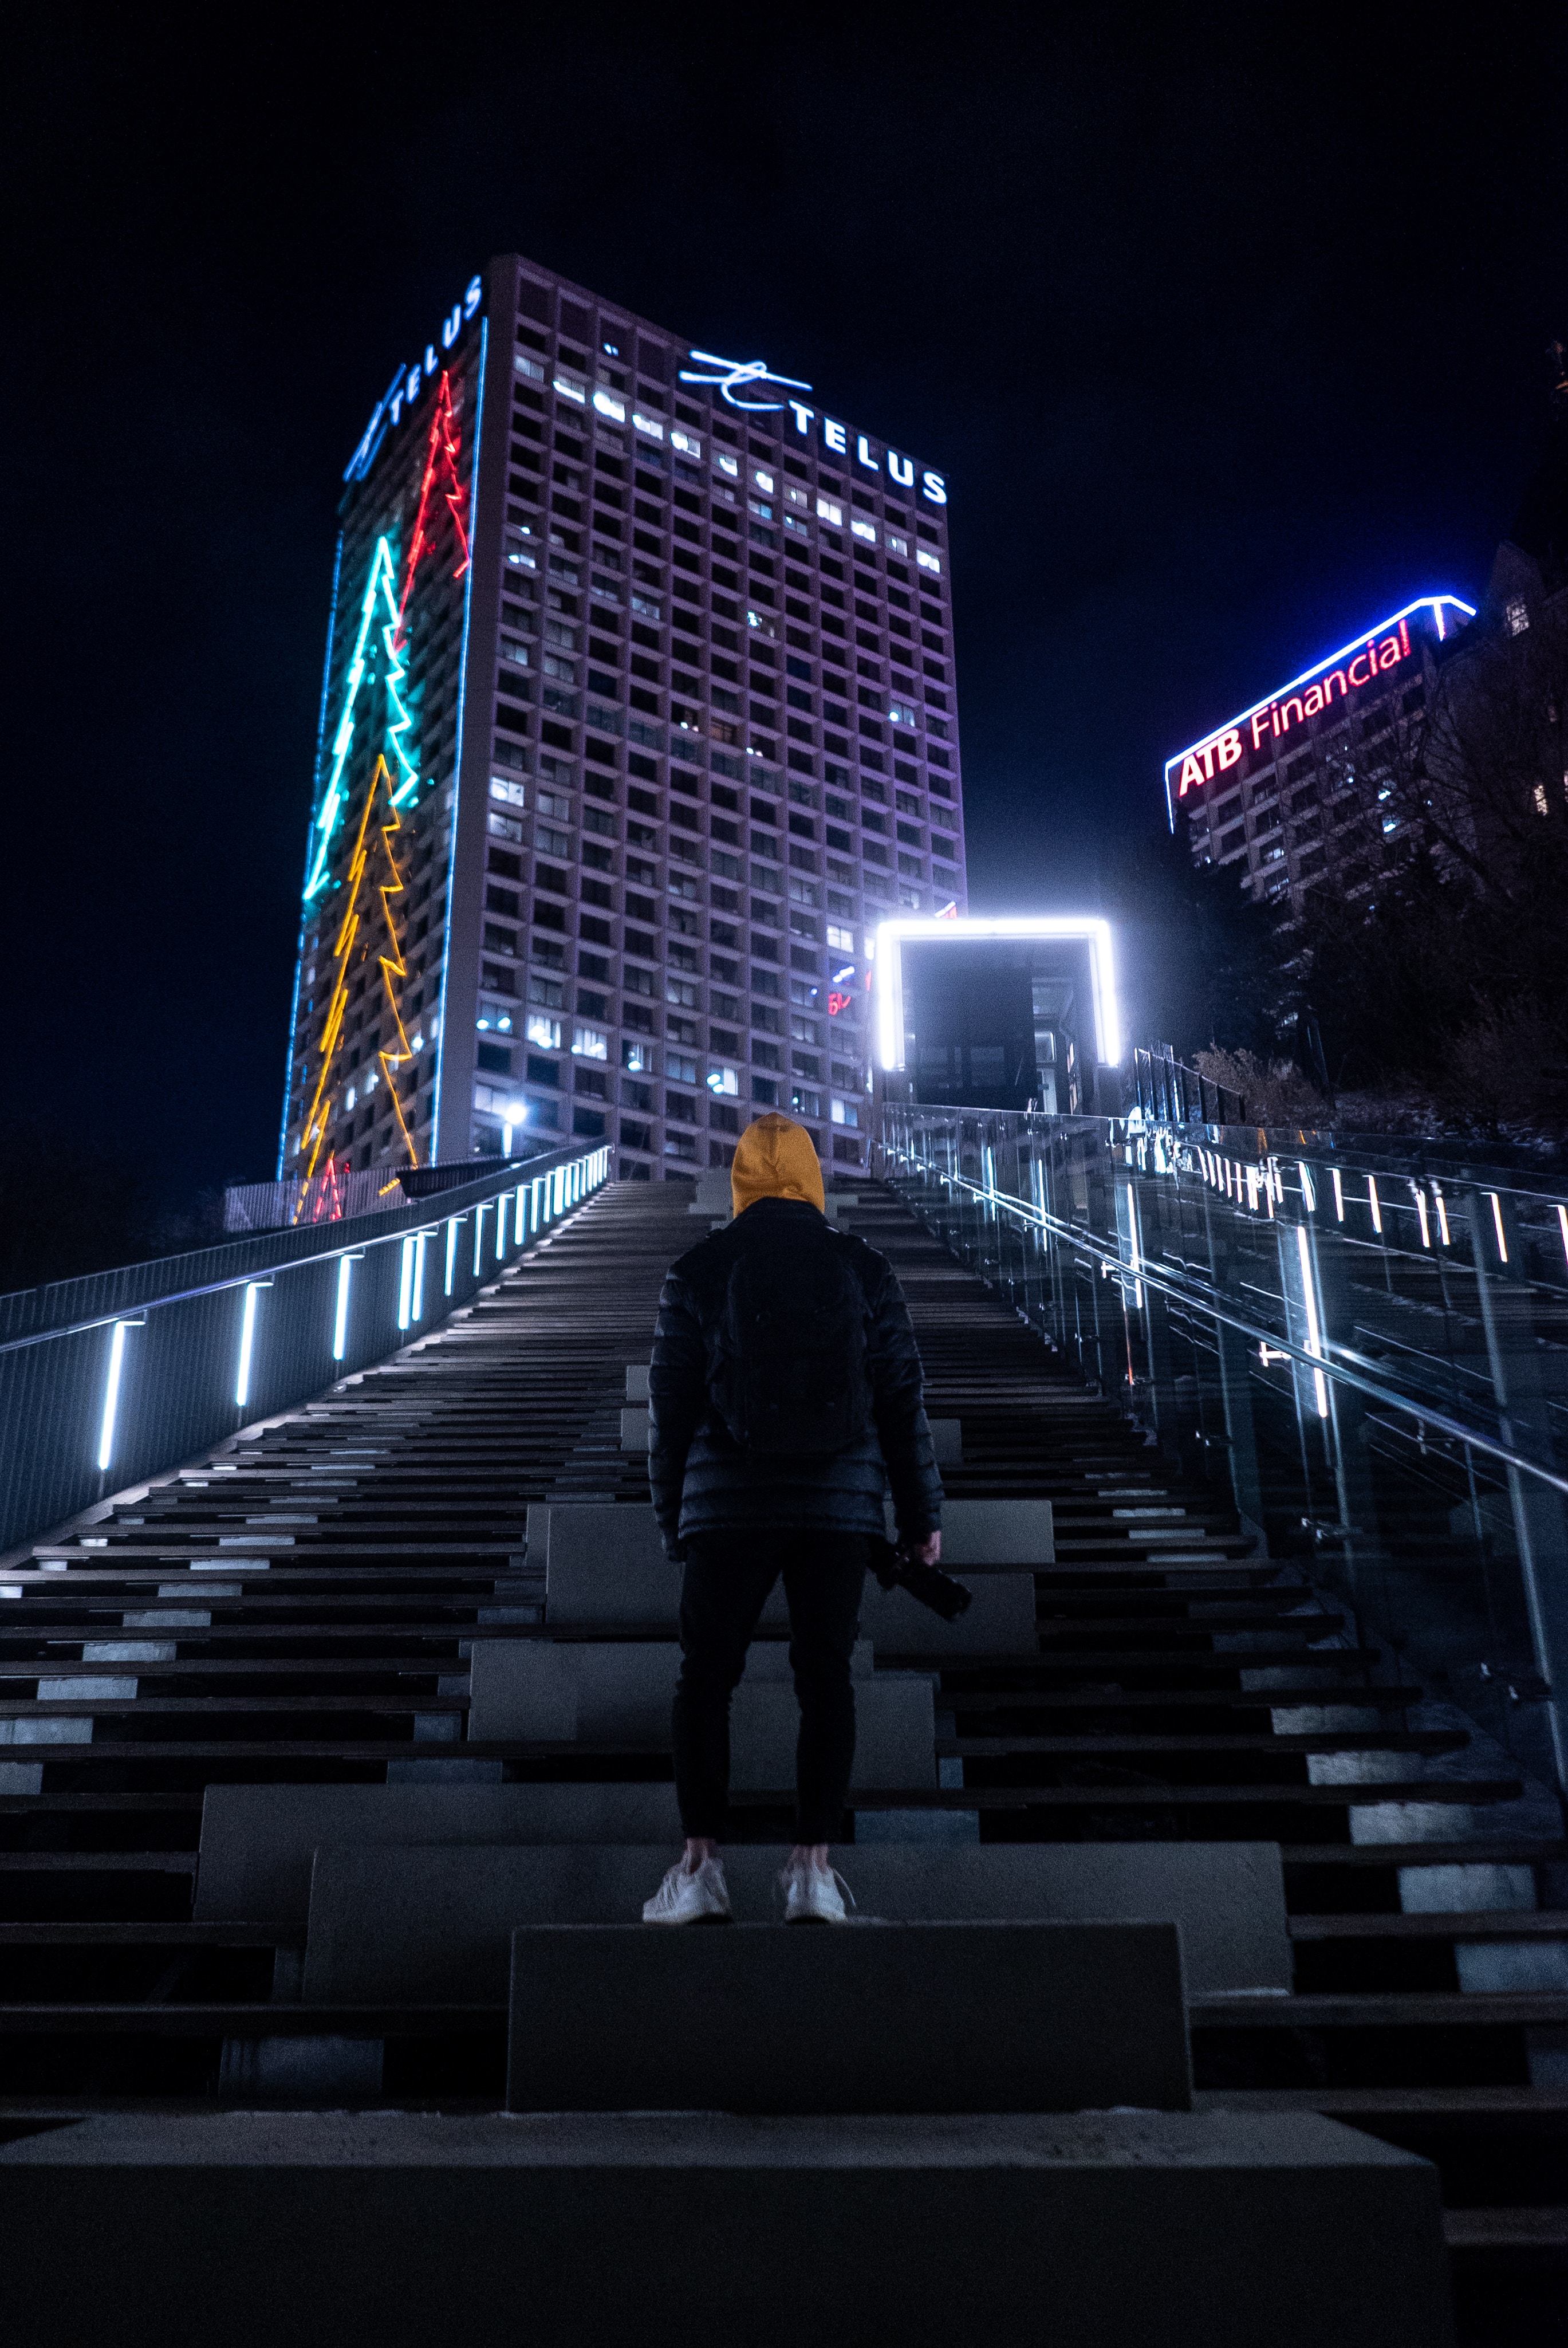 alone, dark, lonely, building, night city, human, person, hood